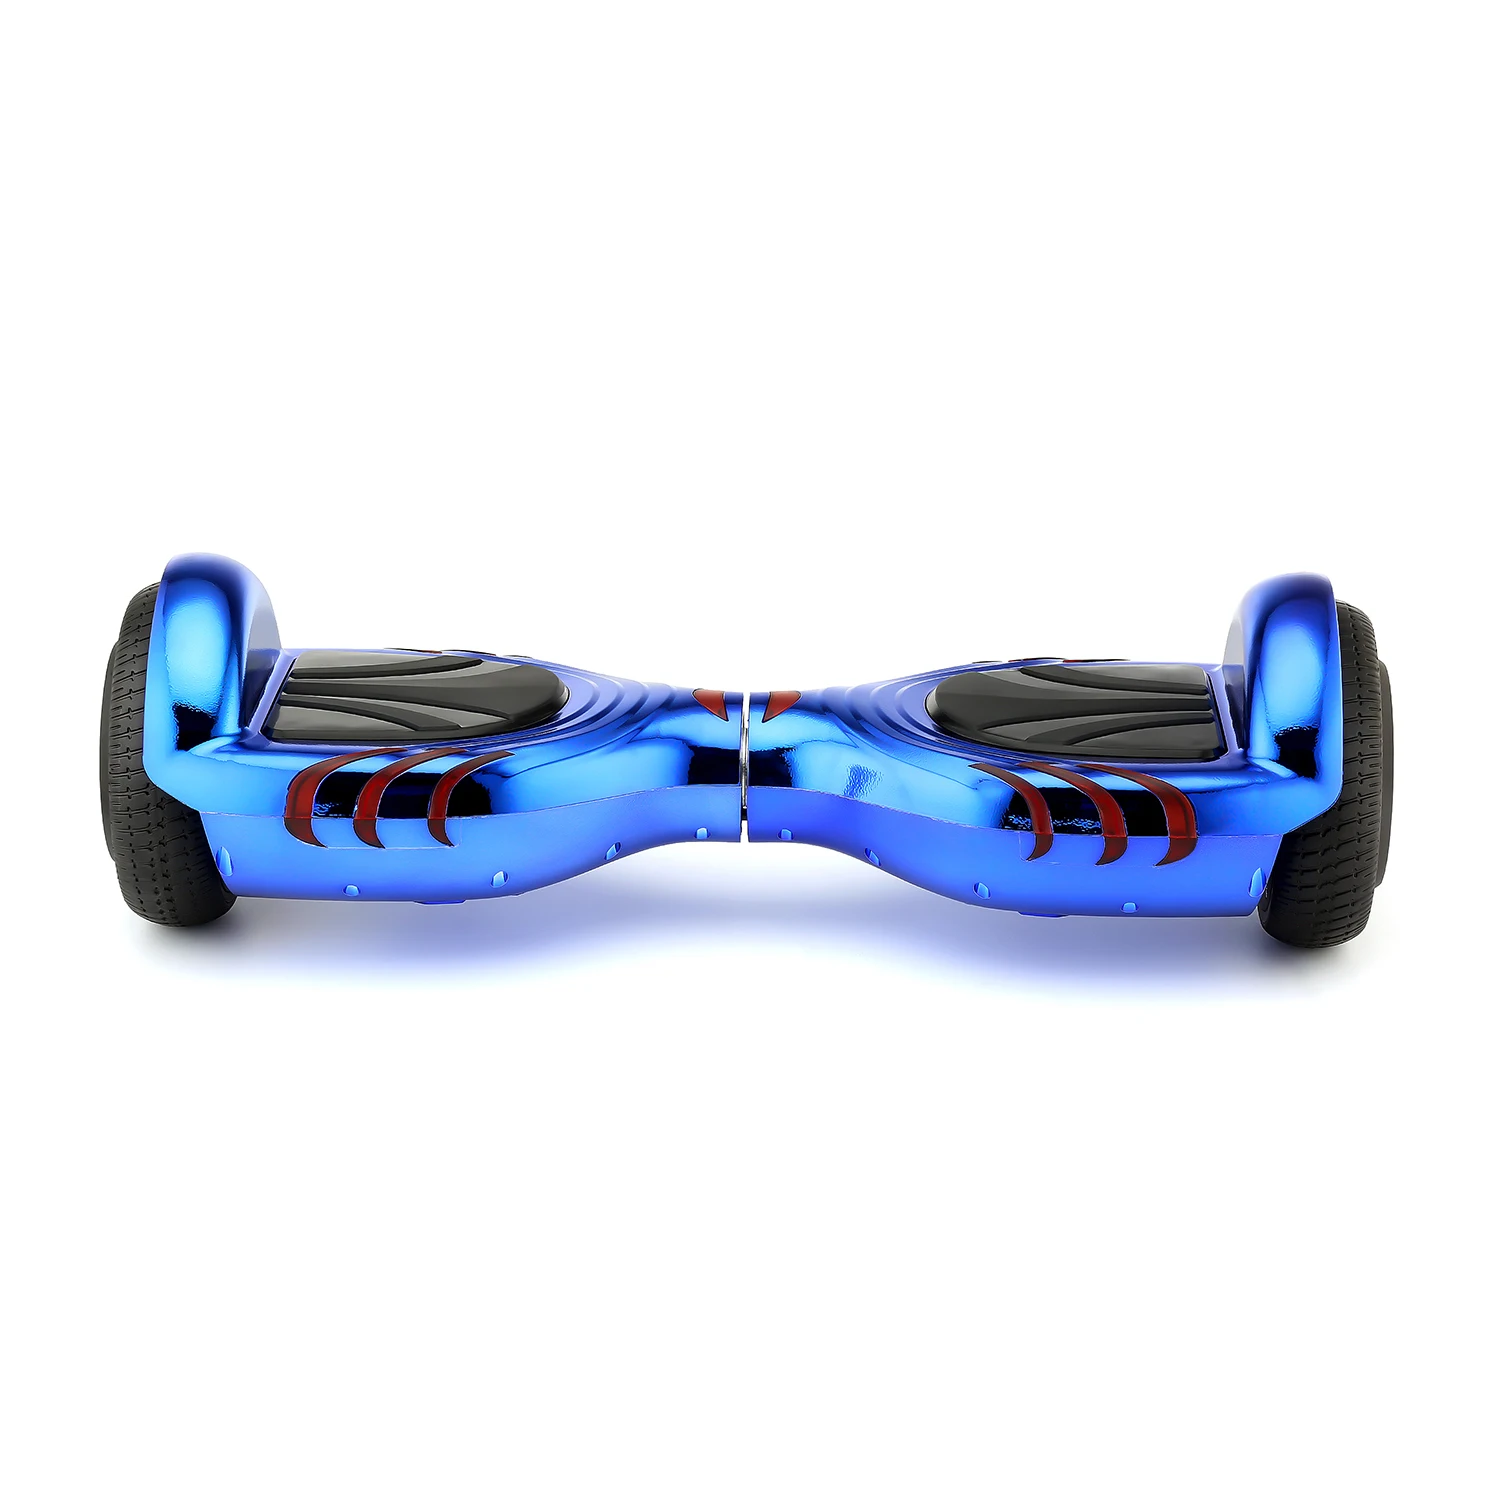 

6.5 Inch Hoverboard Electrico For Children Two Wheel Self-Balance Scooter Board With LED Wheels Hoverboard Skate electrico